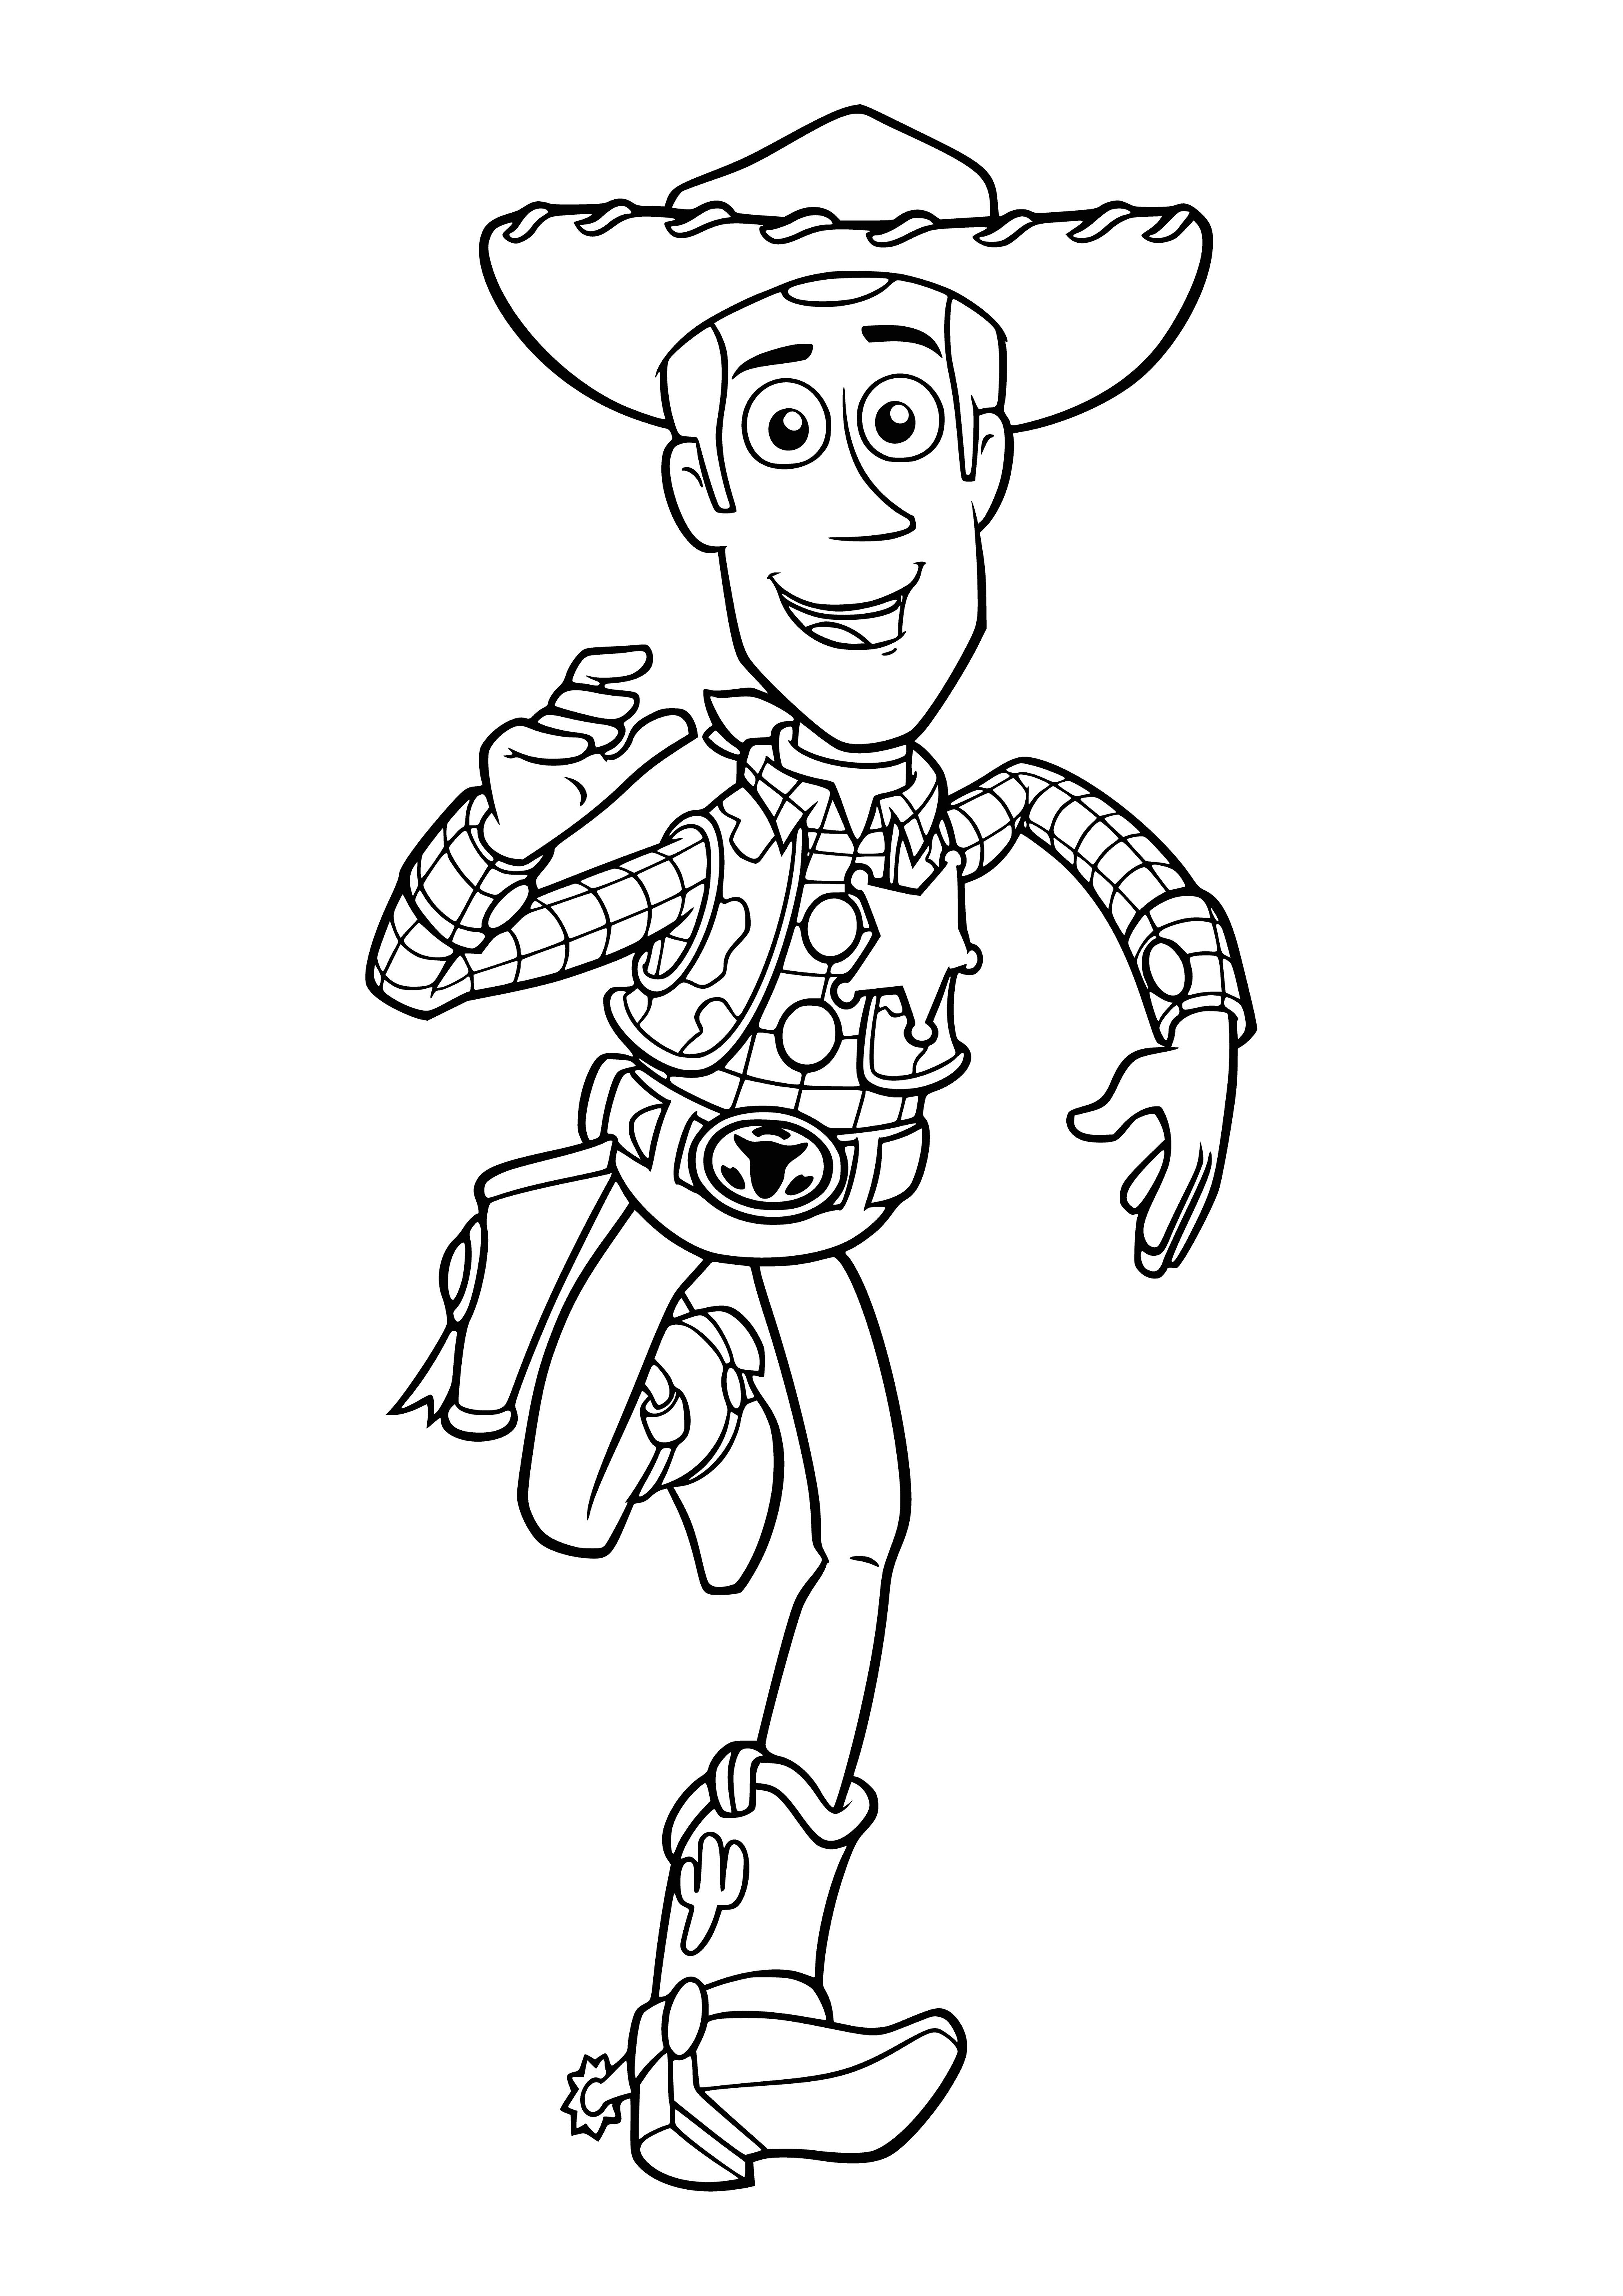 coloring page: A wood Cowboy toy with jointed arms, legs, & a hat; holds a white rope in his hand. #cowboy #toy